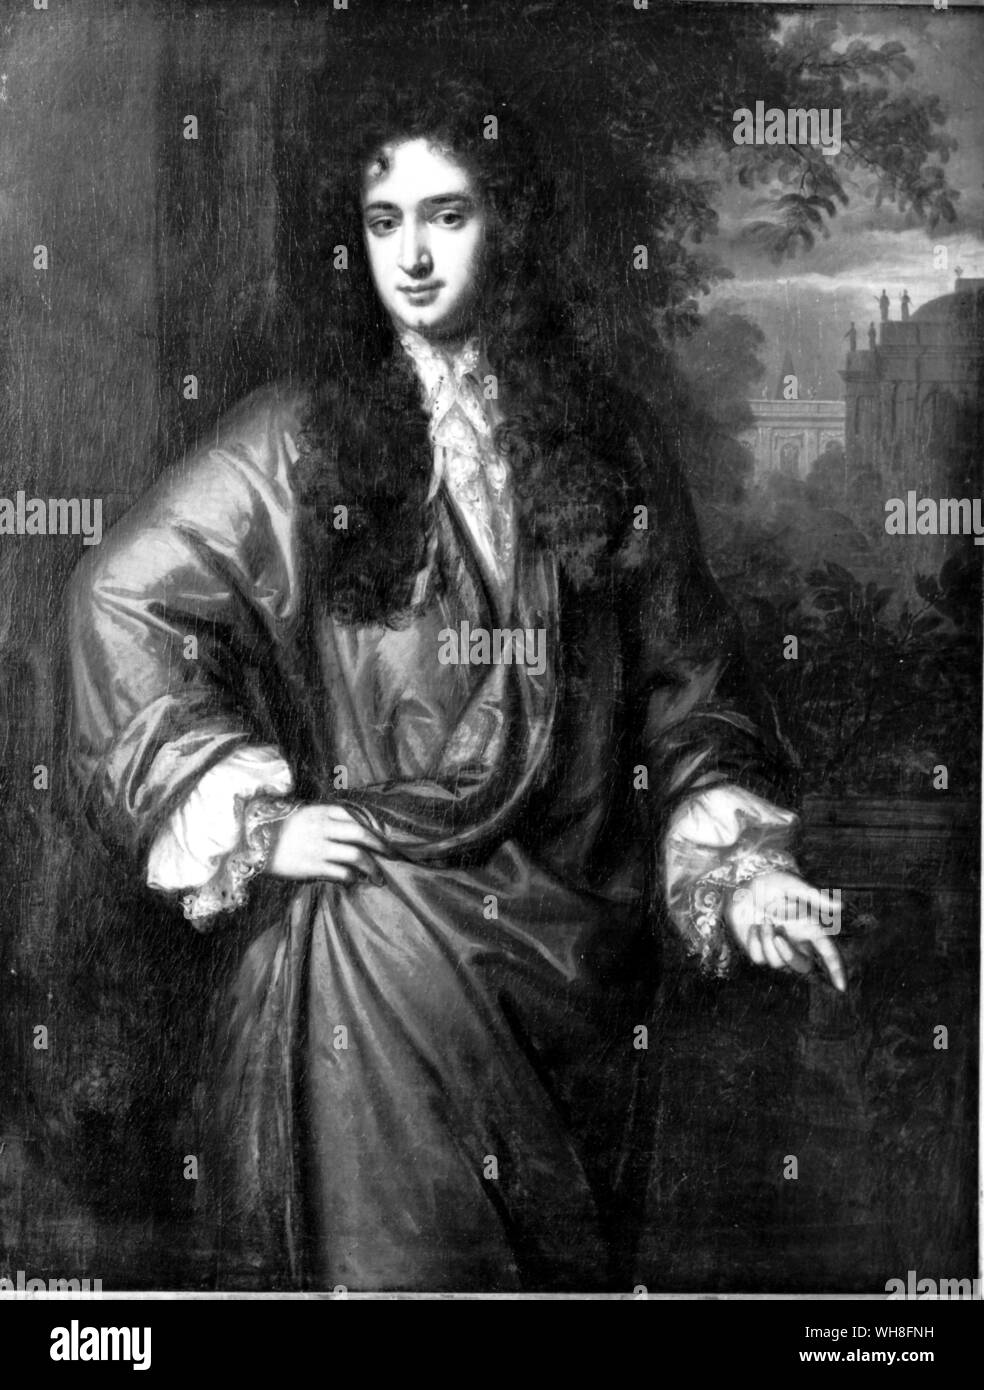 Lord Rochester. John Wilmot, Second Earl of Rochester (1647-1680), was an English courtier and poet. Lord Rochester's Monkey by Graham Greene, page 183. Stock Photo